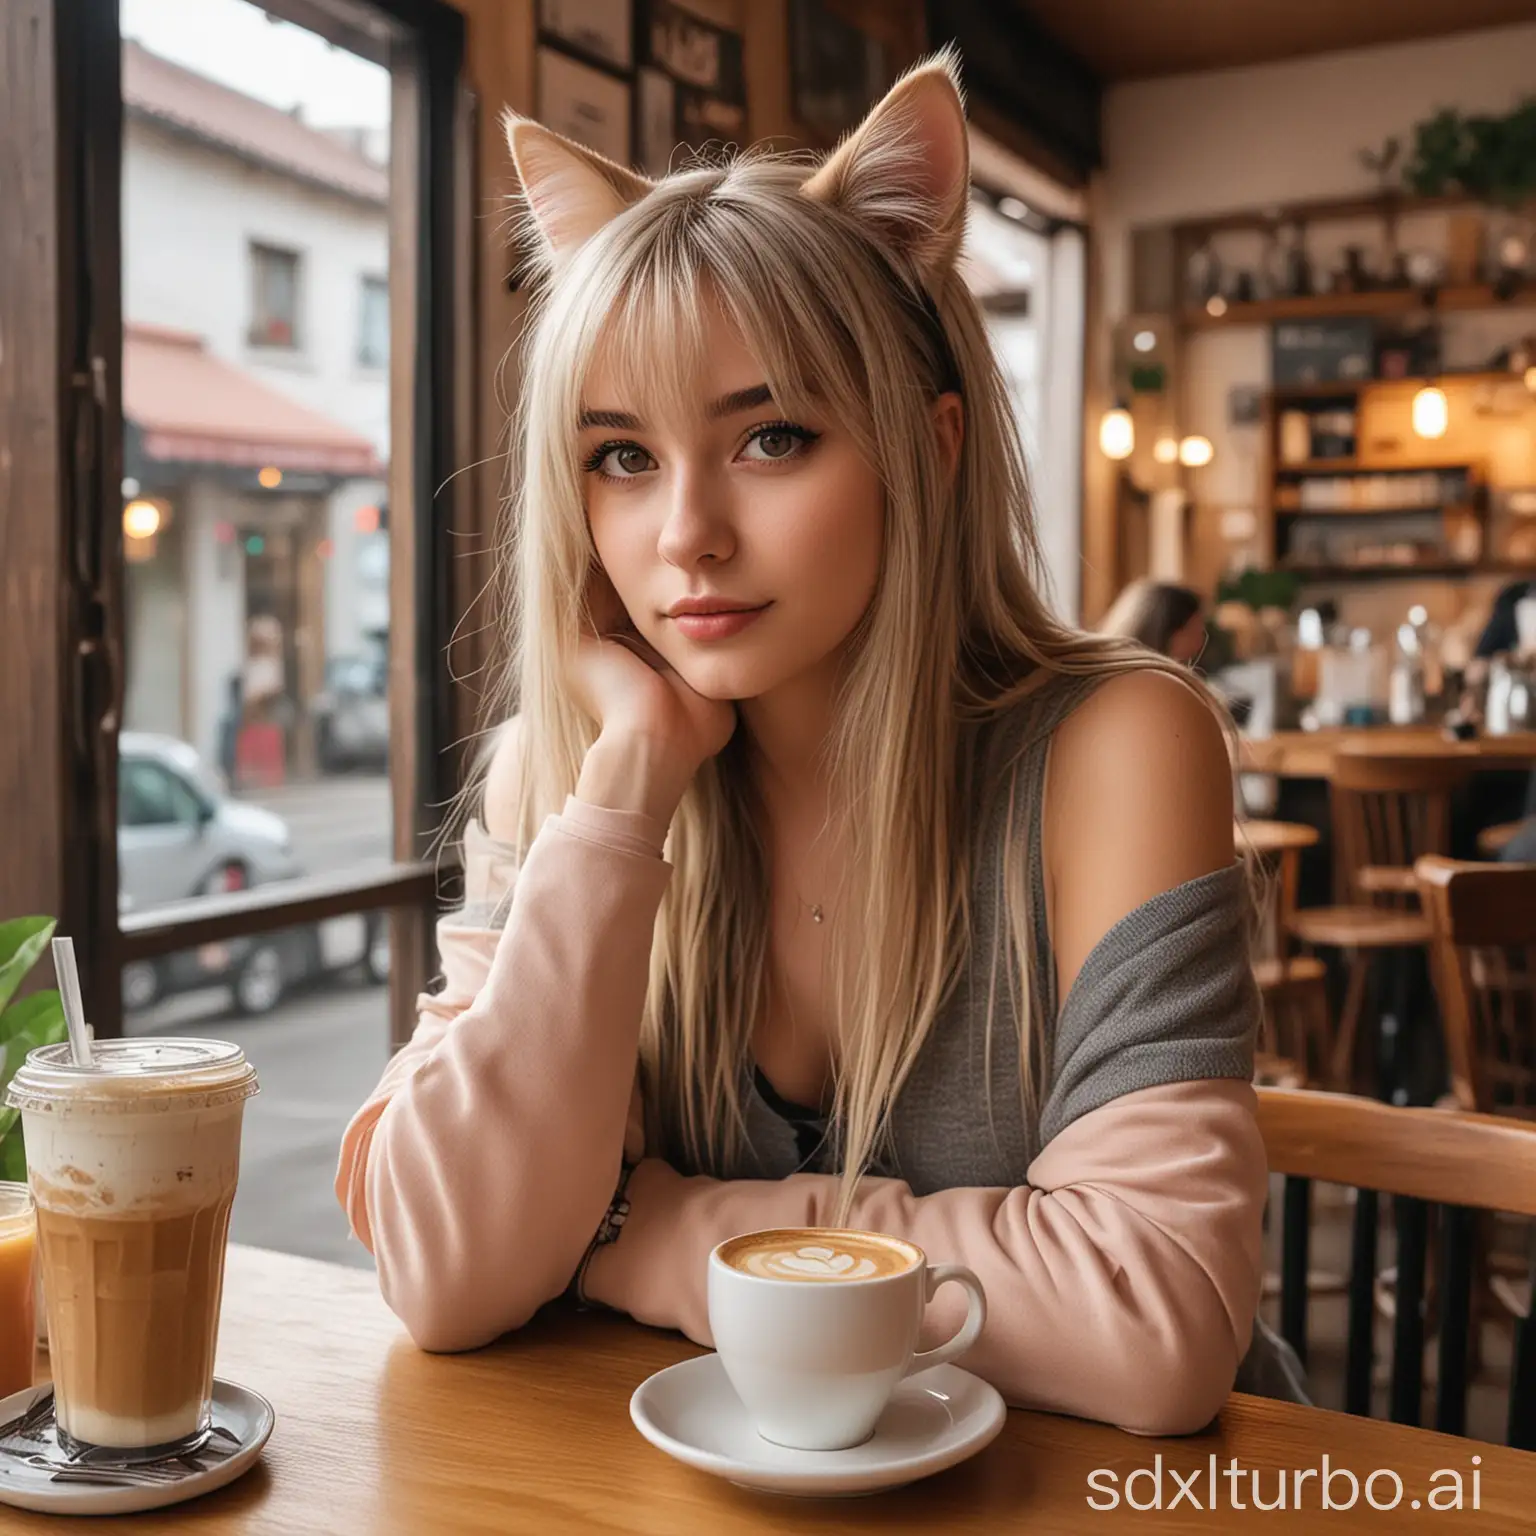 Cat girl in a cafe